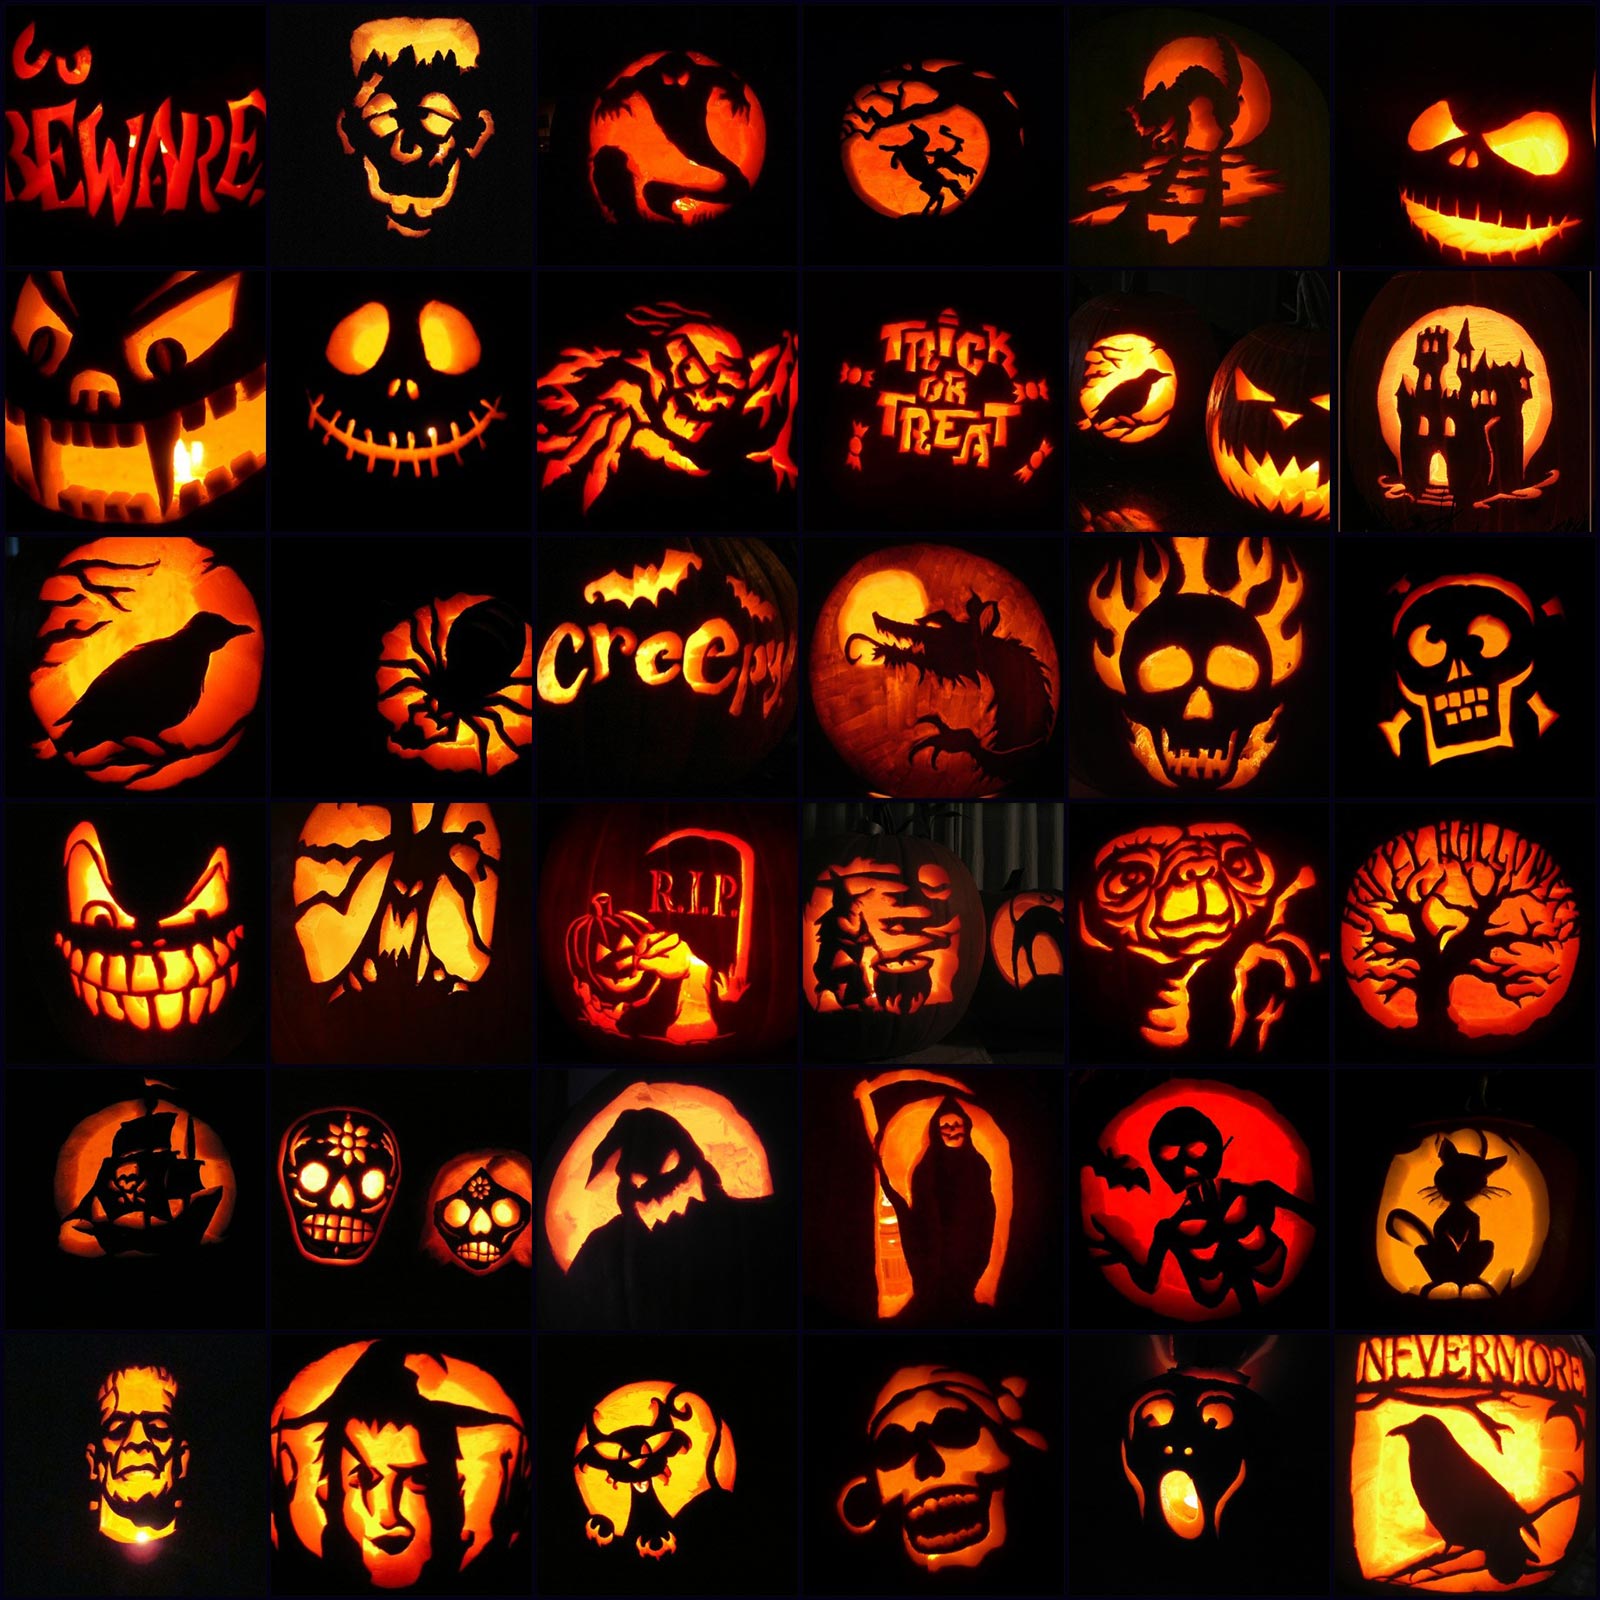 600-scary-halloween-pumpkin-carving-face-ideas-designs-2018-for-kids